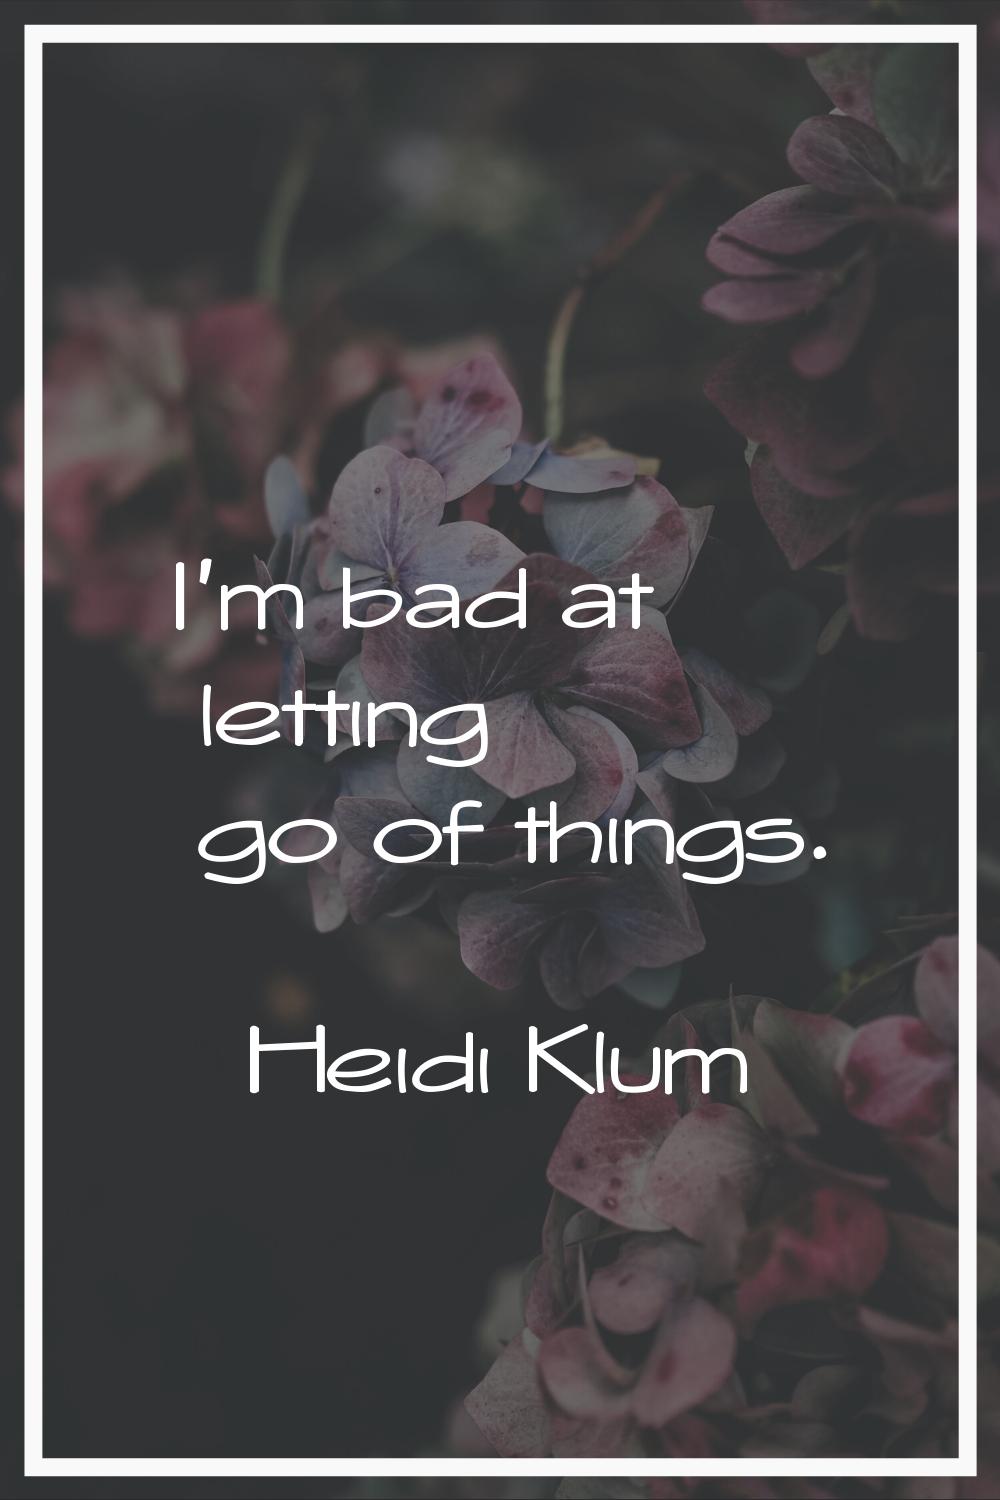 I'm bad at letting go of things.